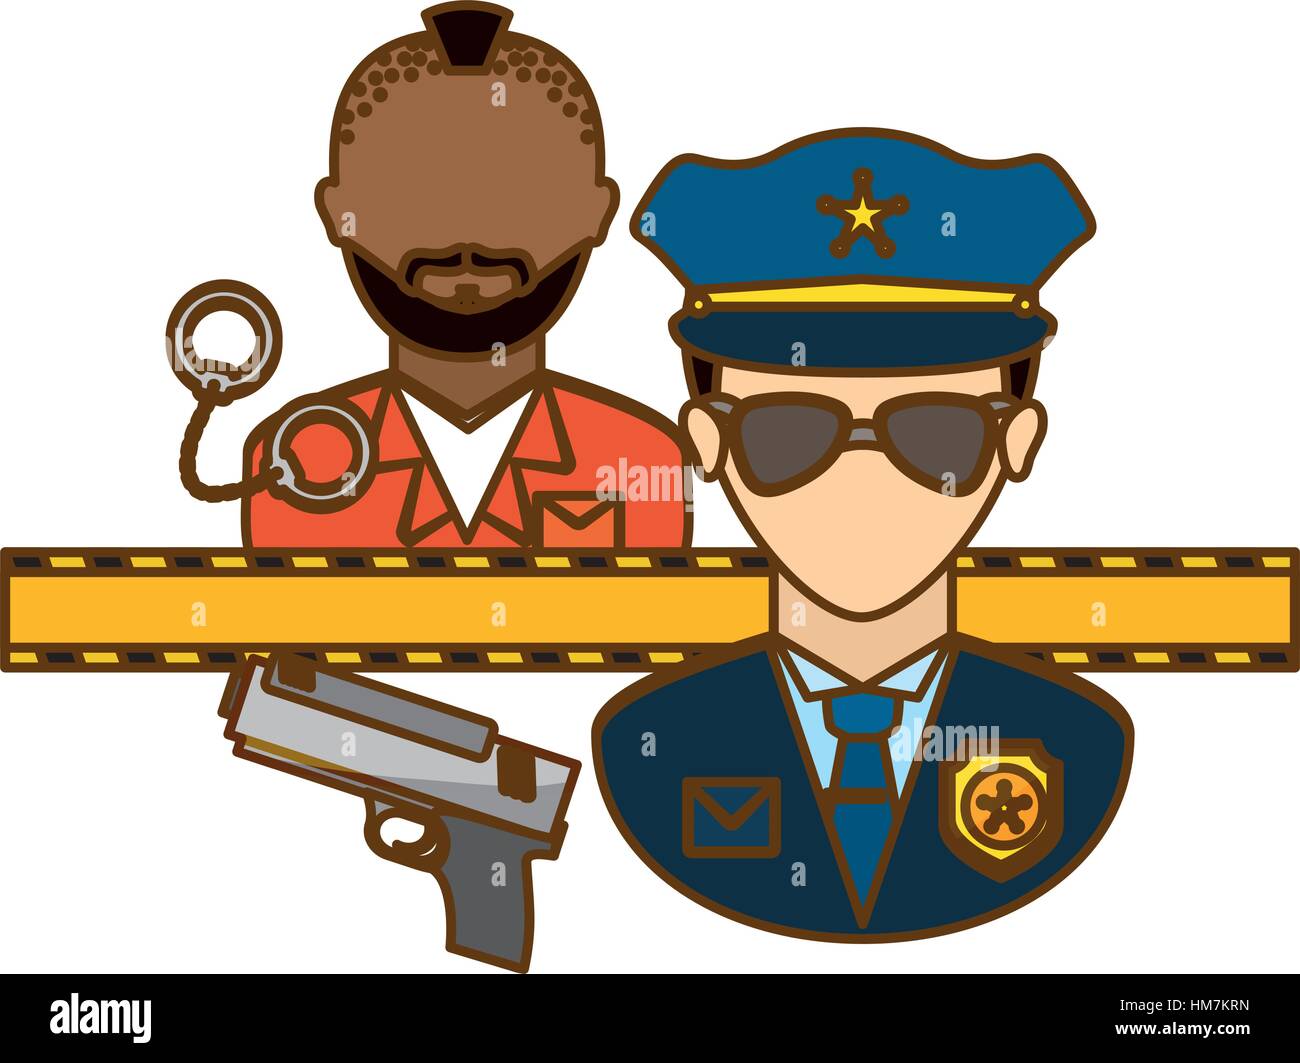 Police Arresting Offender icon image, vector illustration Stock Vector